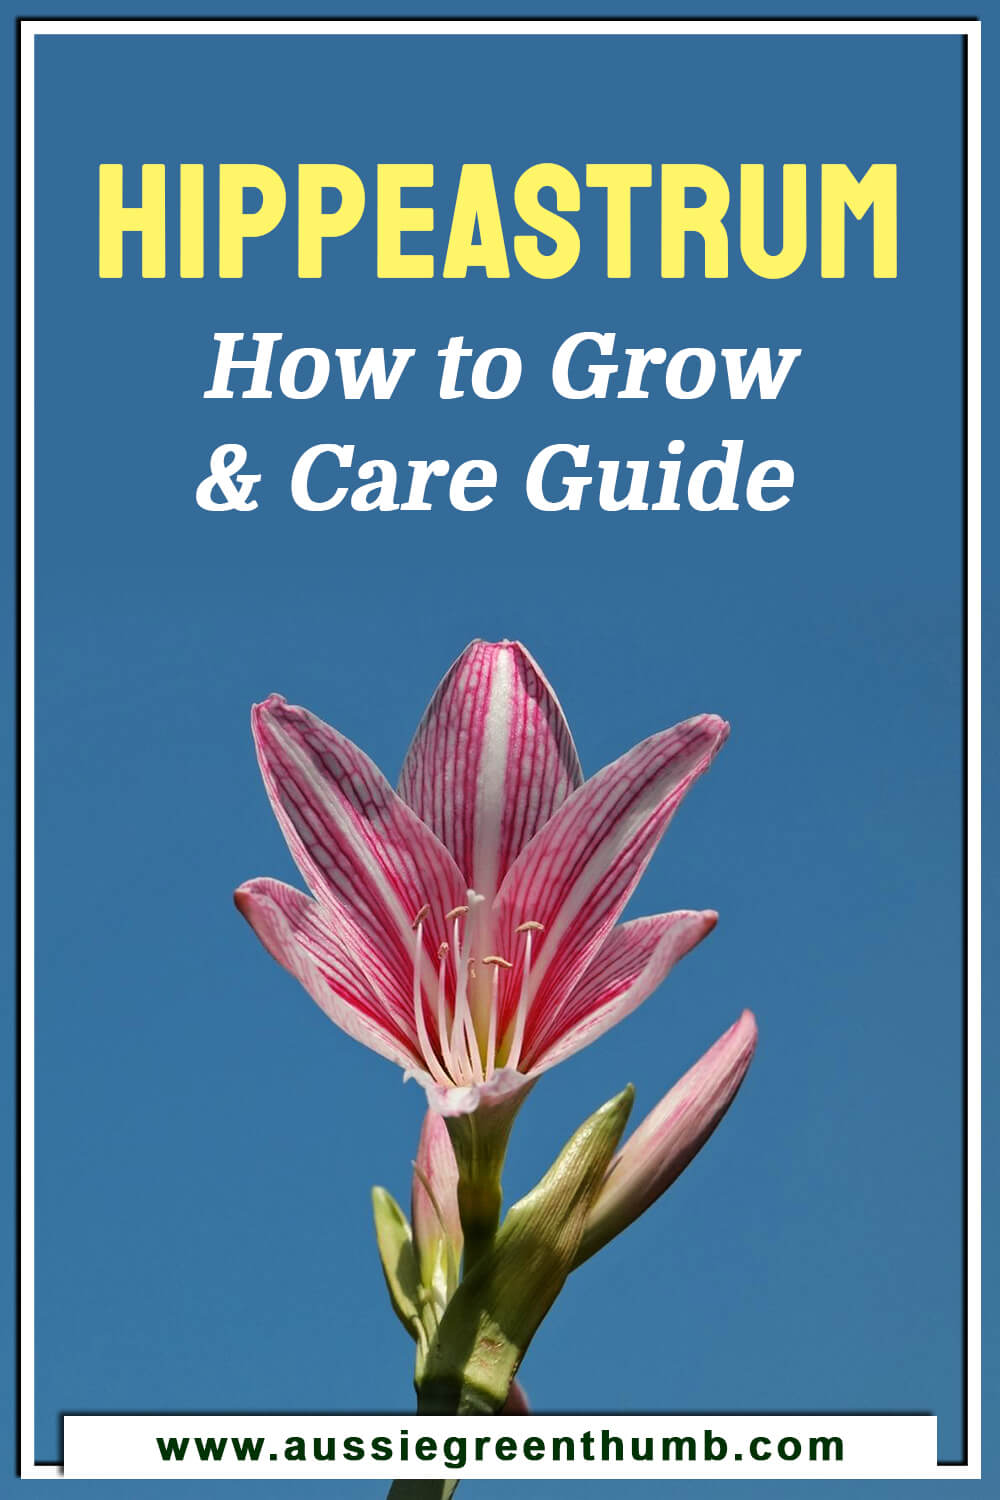 Hippeastrum – How to Grow and Care Guide